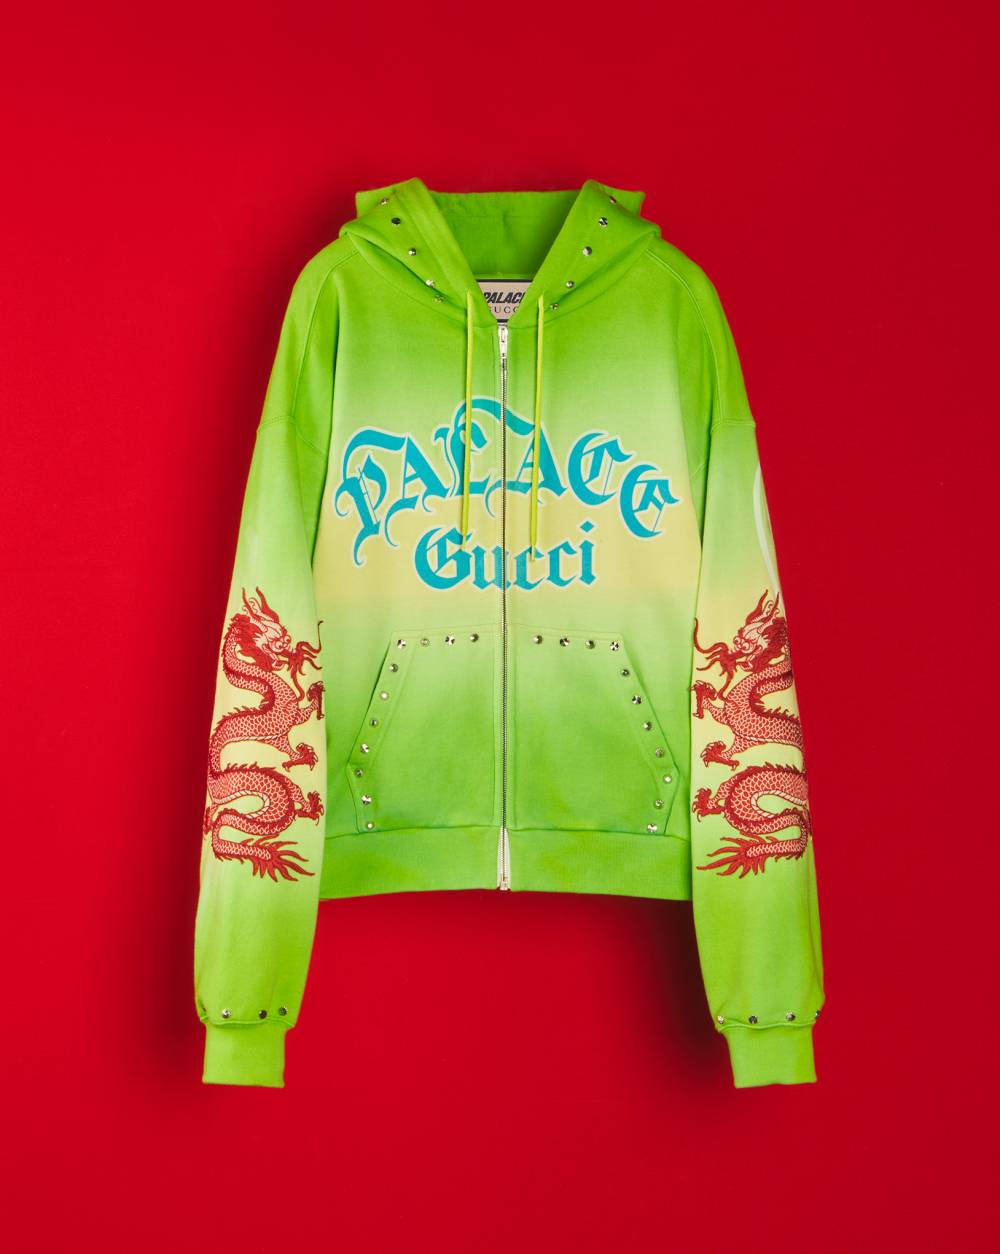 Studded and embroidered tie-dye sweatshirt by Palace Gucci